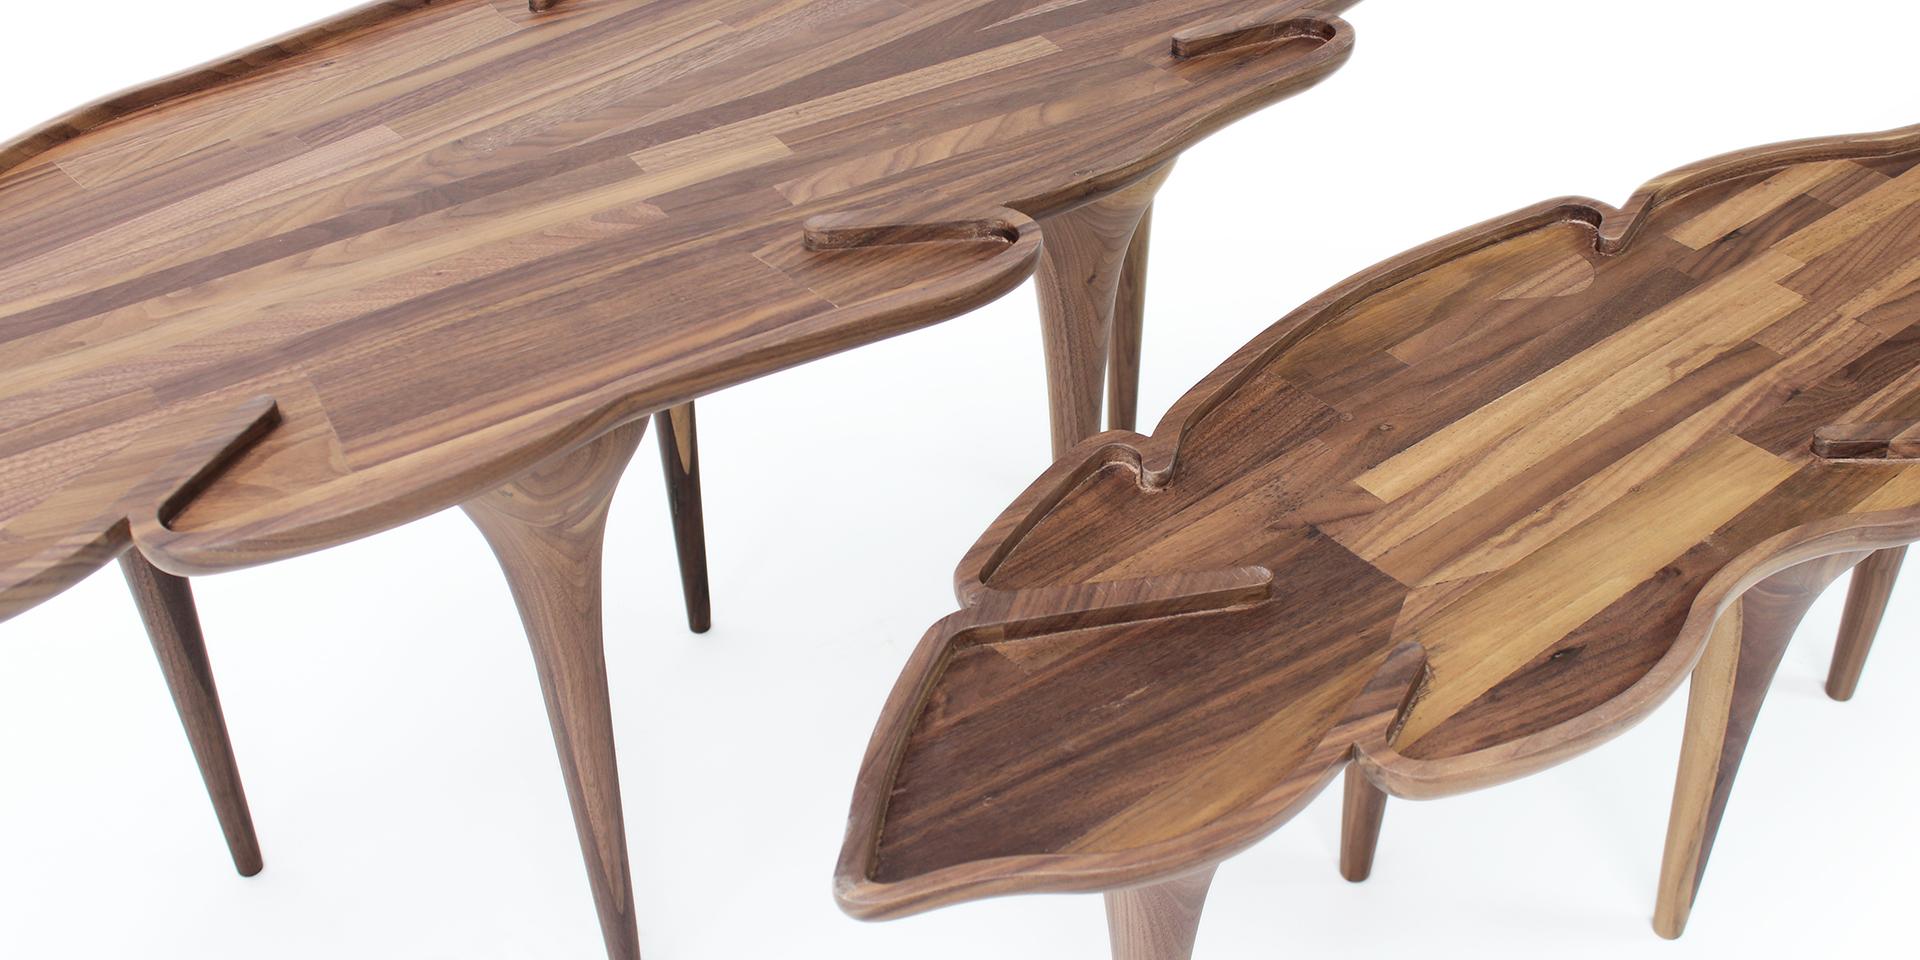 This elegant set of coffee tables, is an elegant piece, 100% handmade with walnut wood. 
The coffee table dazzles in interior designs with organic style decor.
It could be personalised, there are in 3 versions available:
Version 1 - Solid Walnut